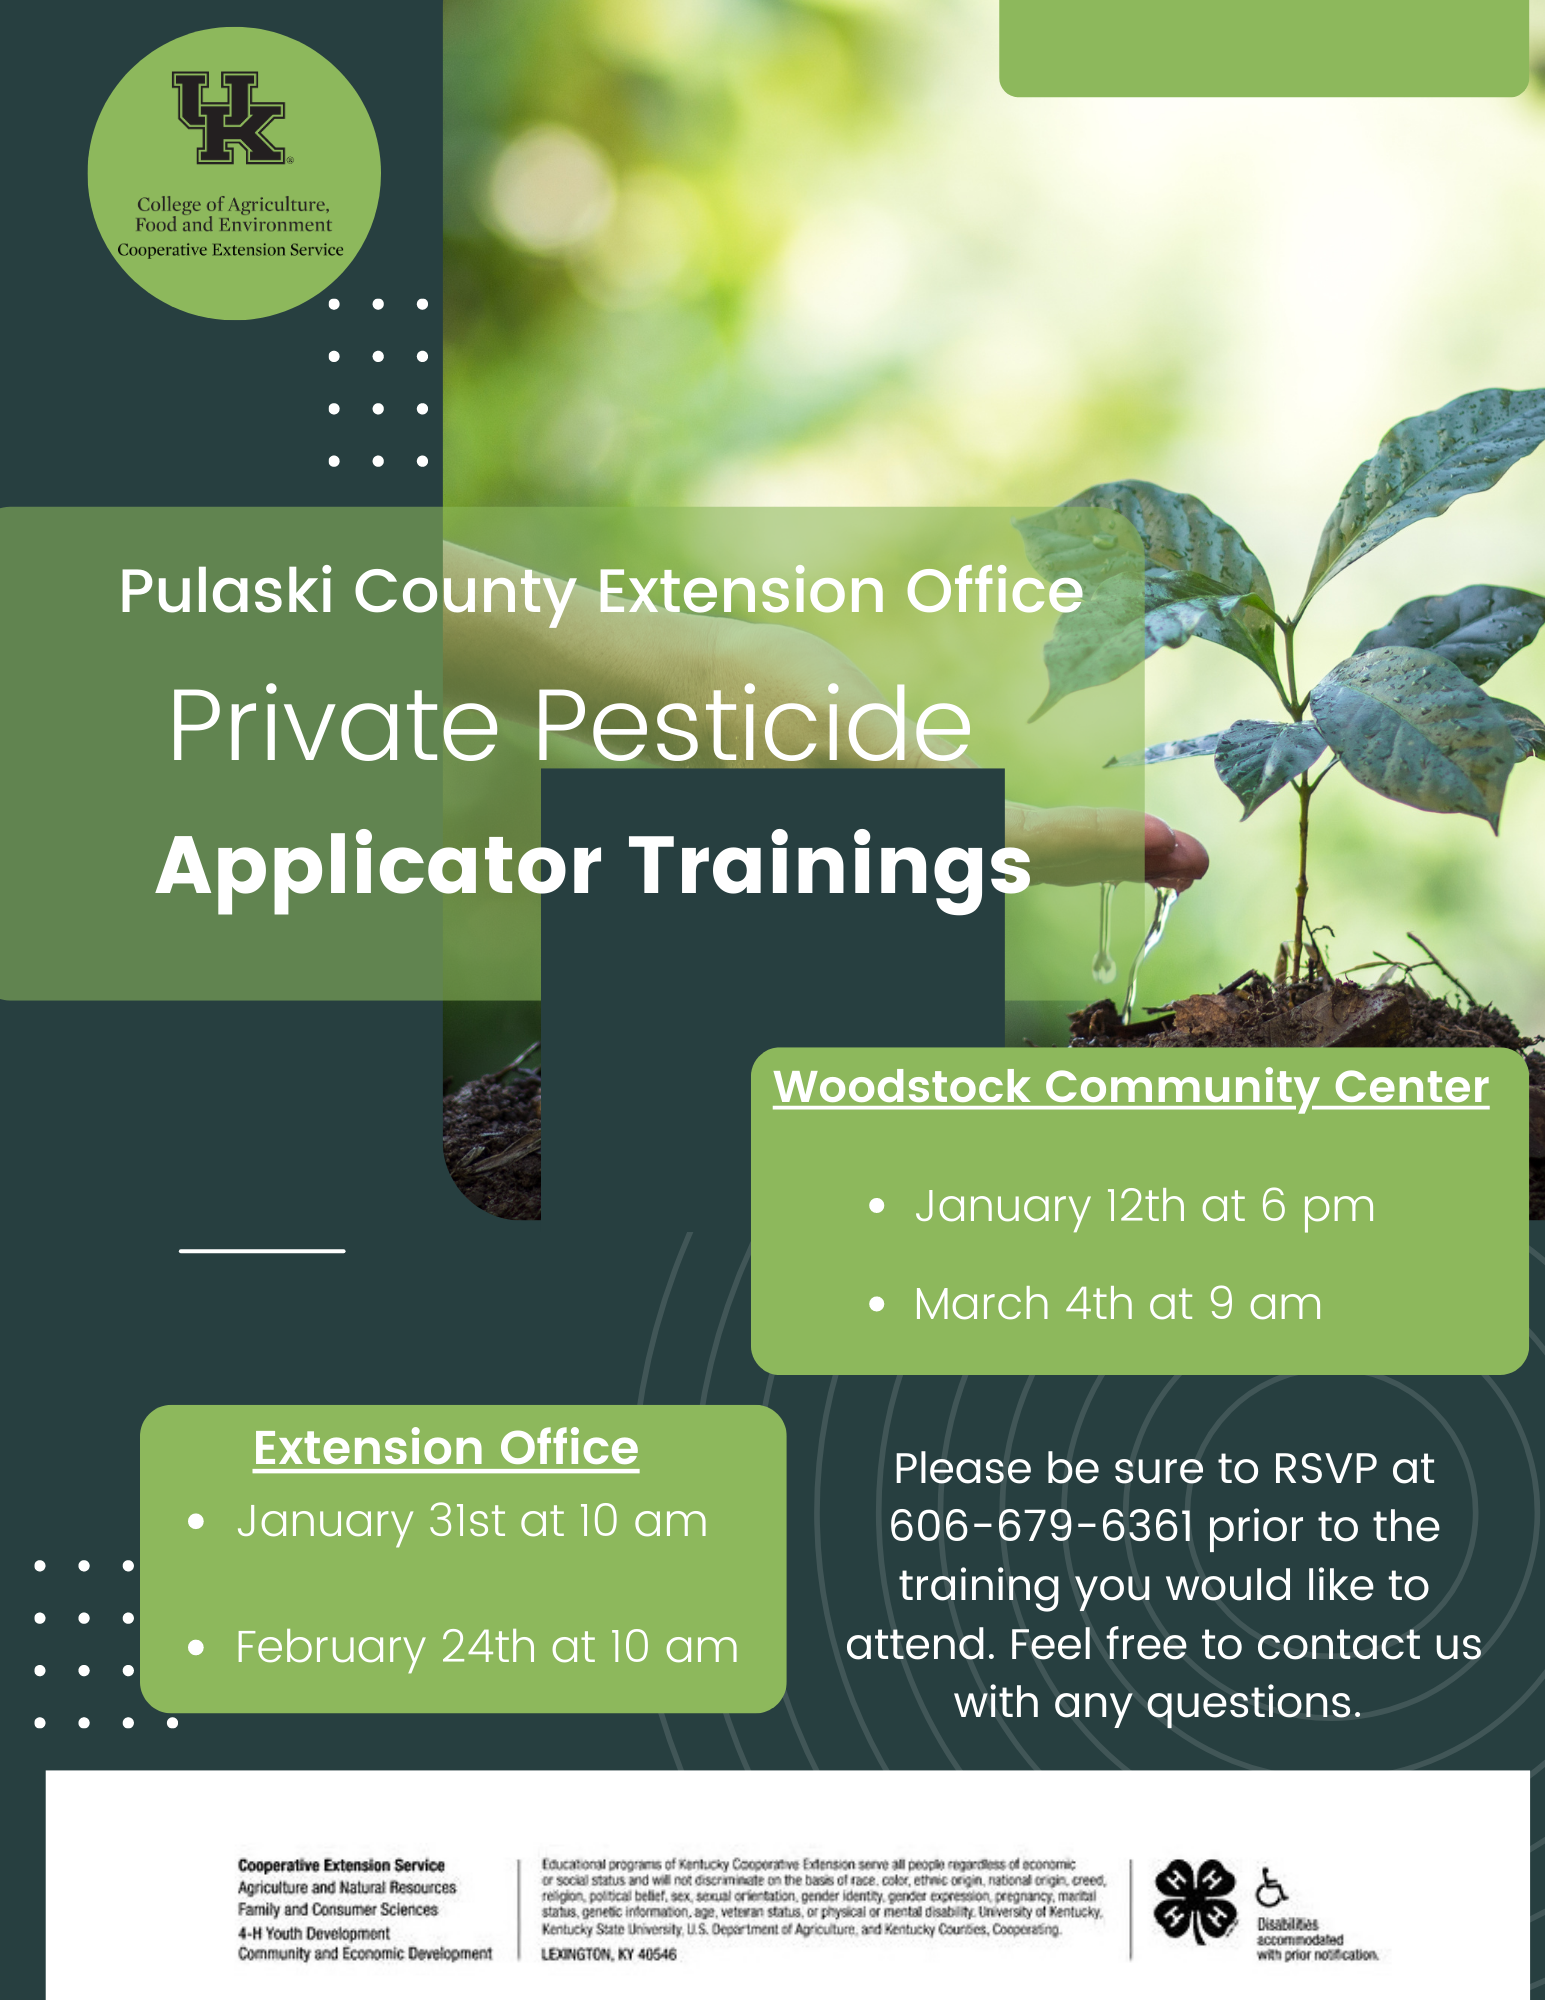 picture of dates and times for private pesticide trainings